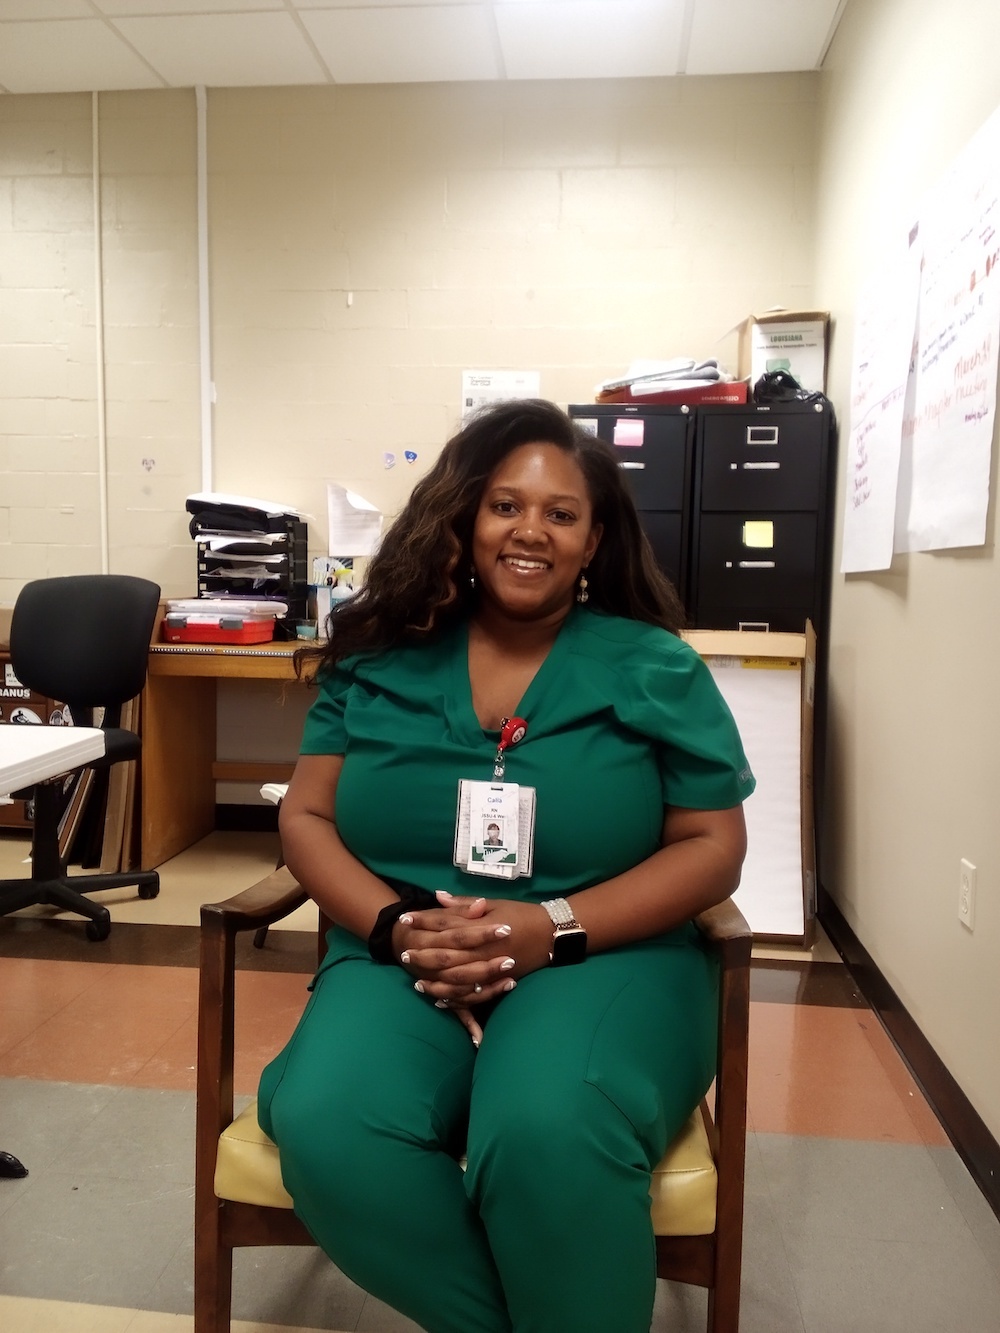 Black woman with long hair, wearing green scrubs, sitting in chair and smiling